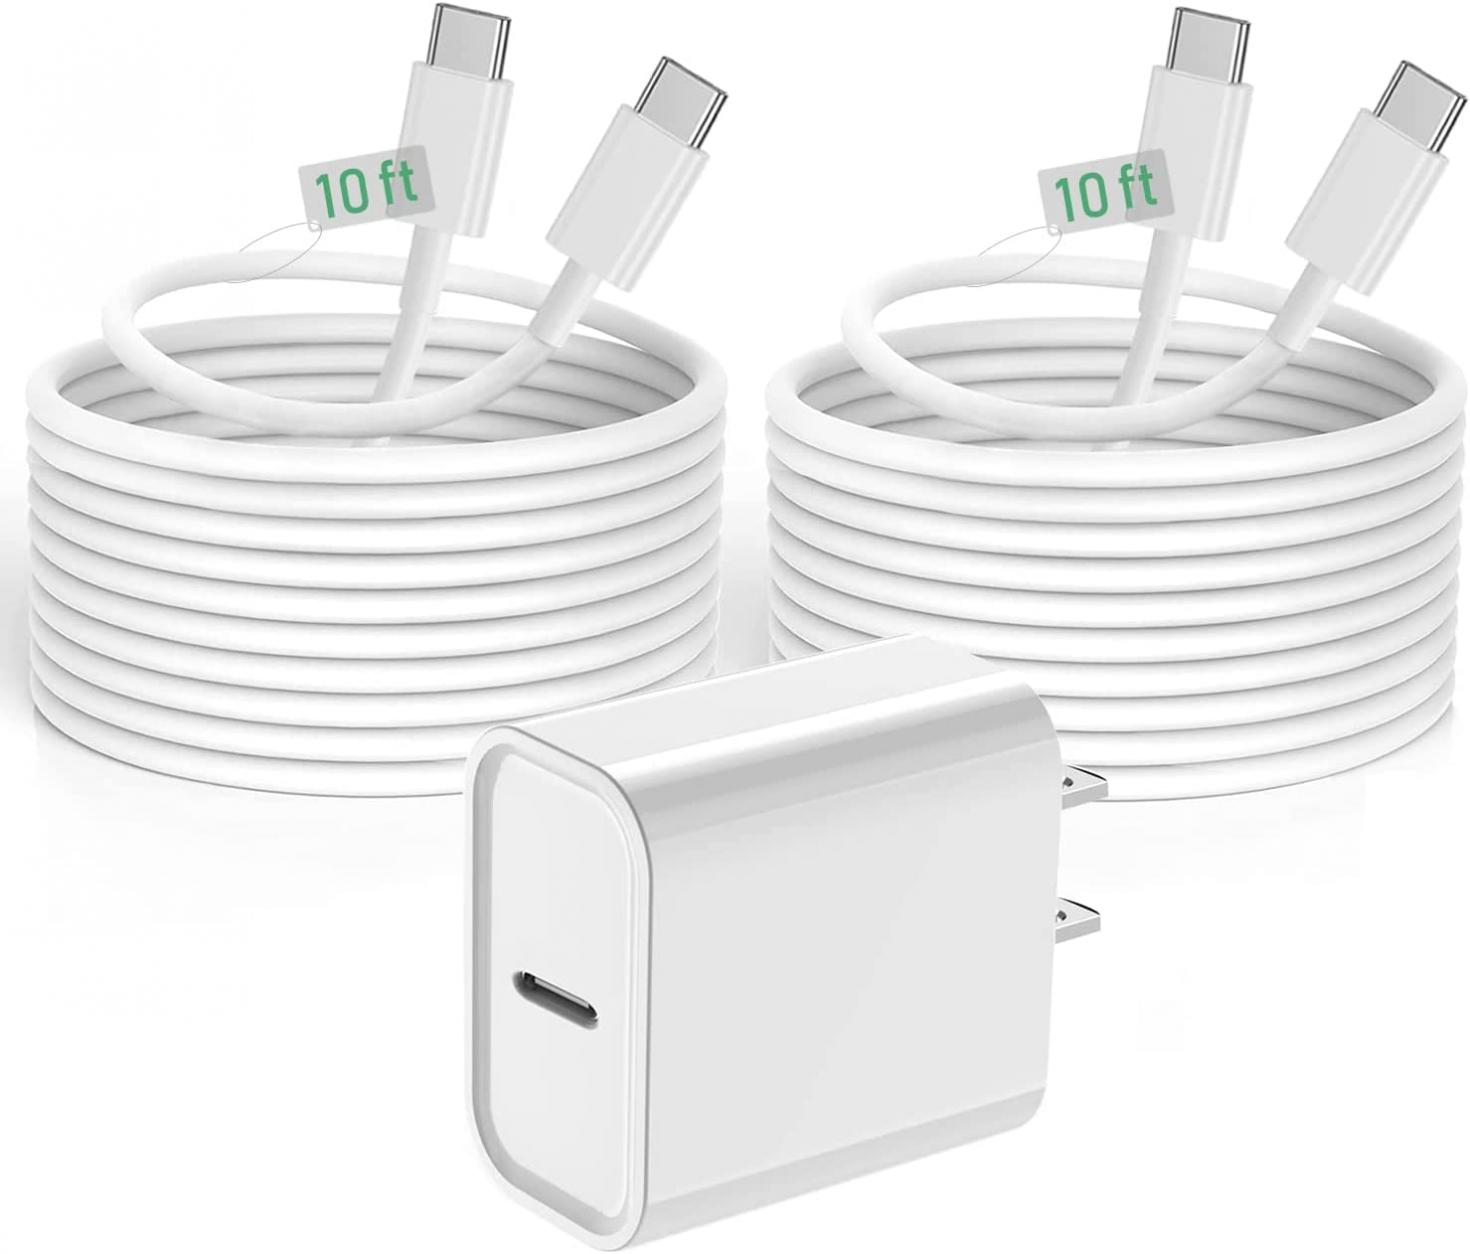 iPad Pro Charger,iPad Charger Cord 2Pack 10 FT Apple Certified,20W Tyce C Charger with Long USB C to C Cable Compatible with iPad Pro 12.9/11 inch 2021/2020/2018,iPad Air 5th/4th Gen/iPad Mini 6th Gen